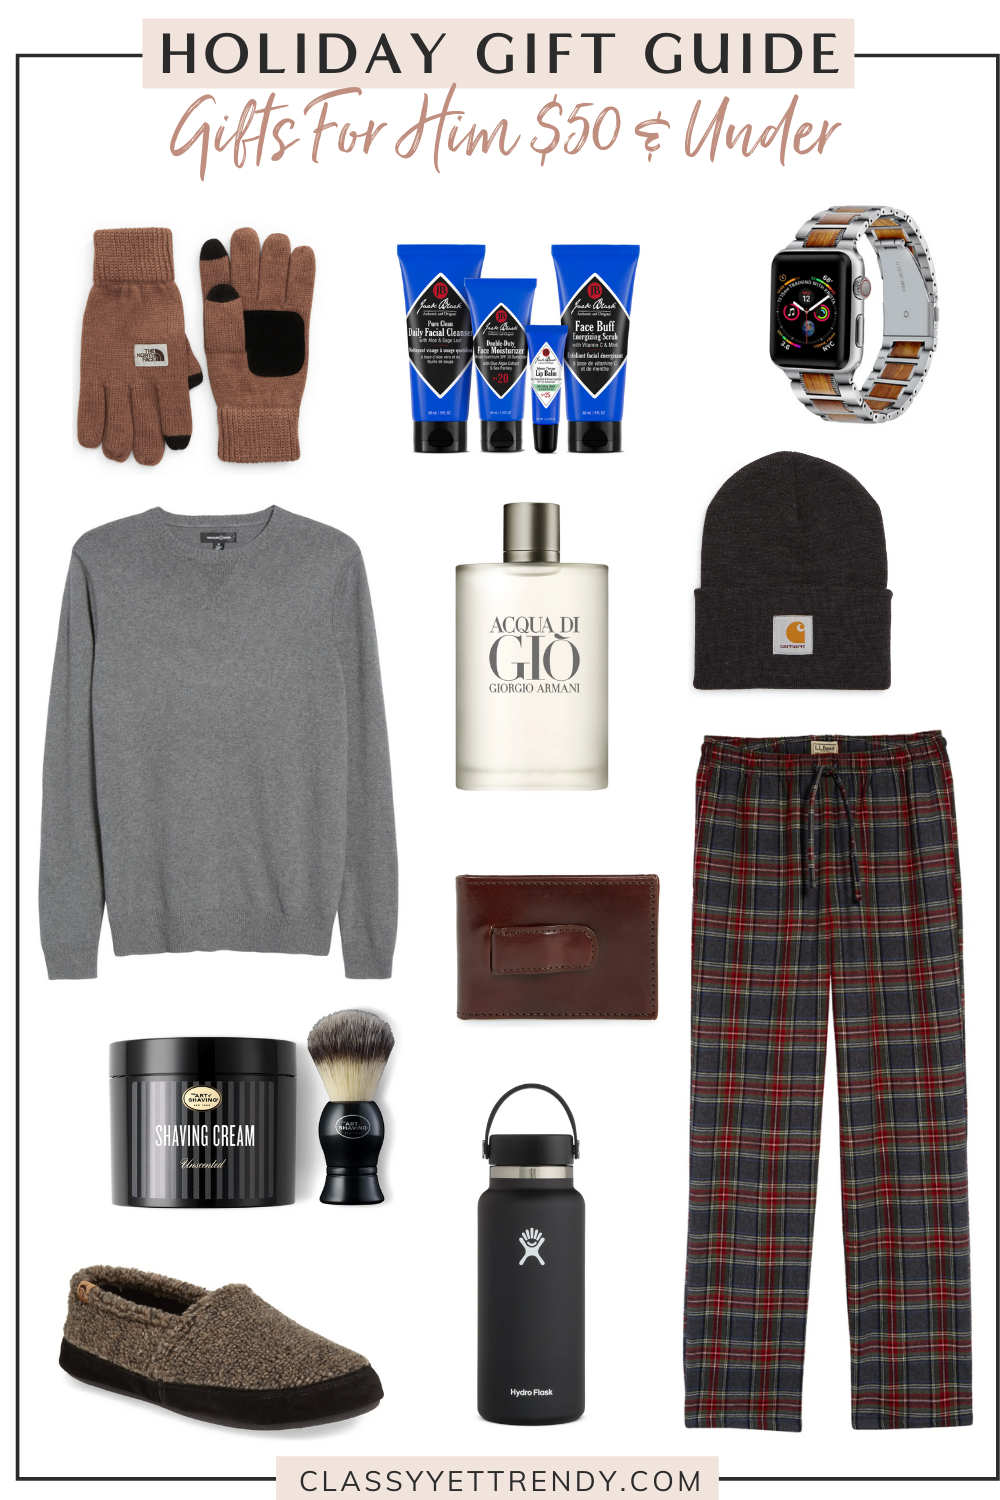 GIFT GUIDE: GIFTS FOR HIM